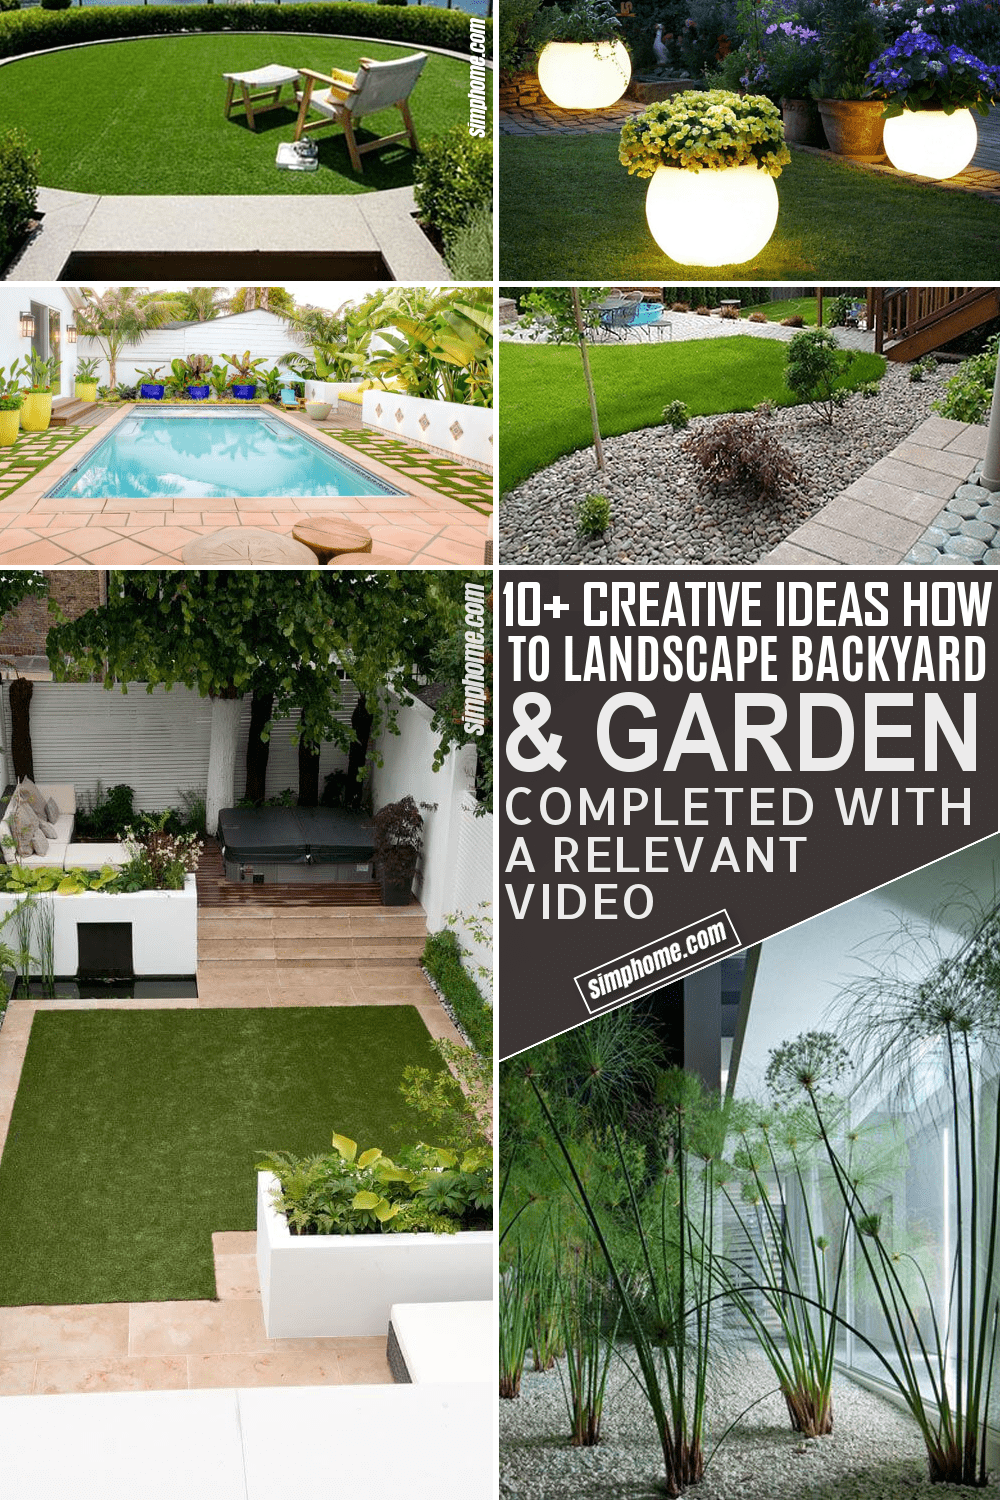 10 Ideas on How to Landscape Backyards and Gardens by Simphome.com